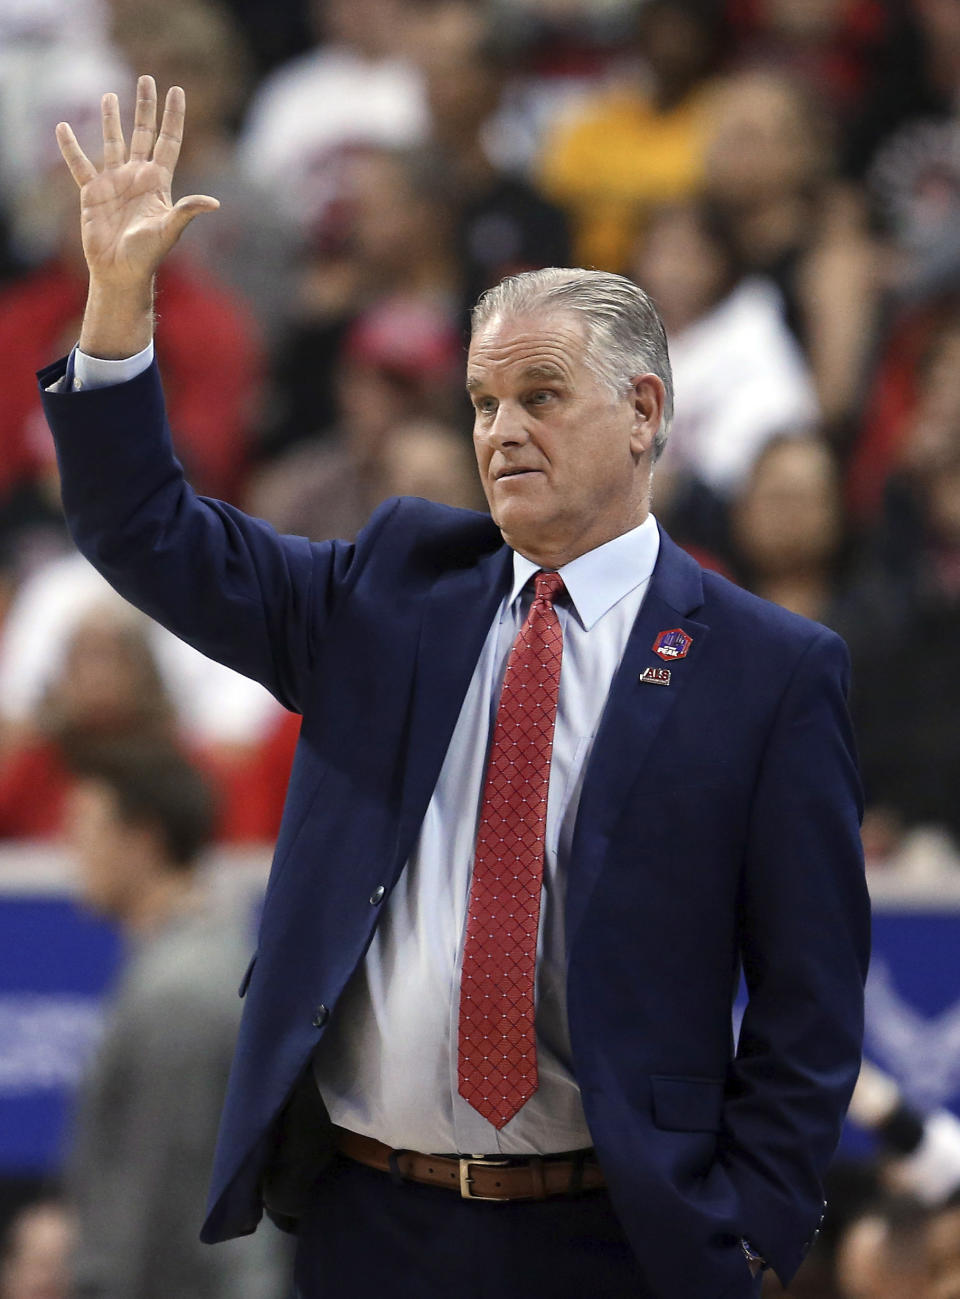 San Diego State coach Brian Dutcher gestures during the first half of the team's NCAA college basketball game against Boise State in the Mountain West Conference men's tournament Friday, March 6, 2020, in Las Vegas. (AP Photo/Isaac Brekken)